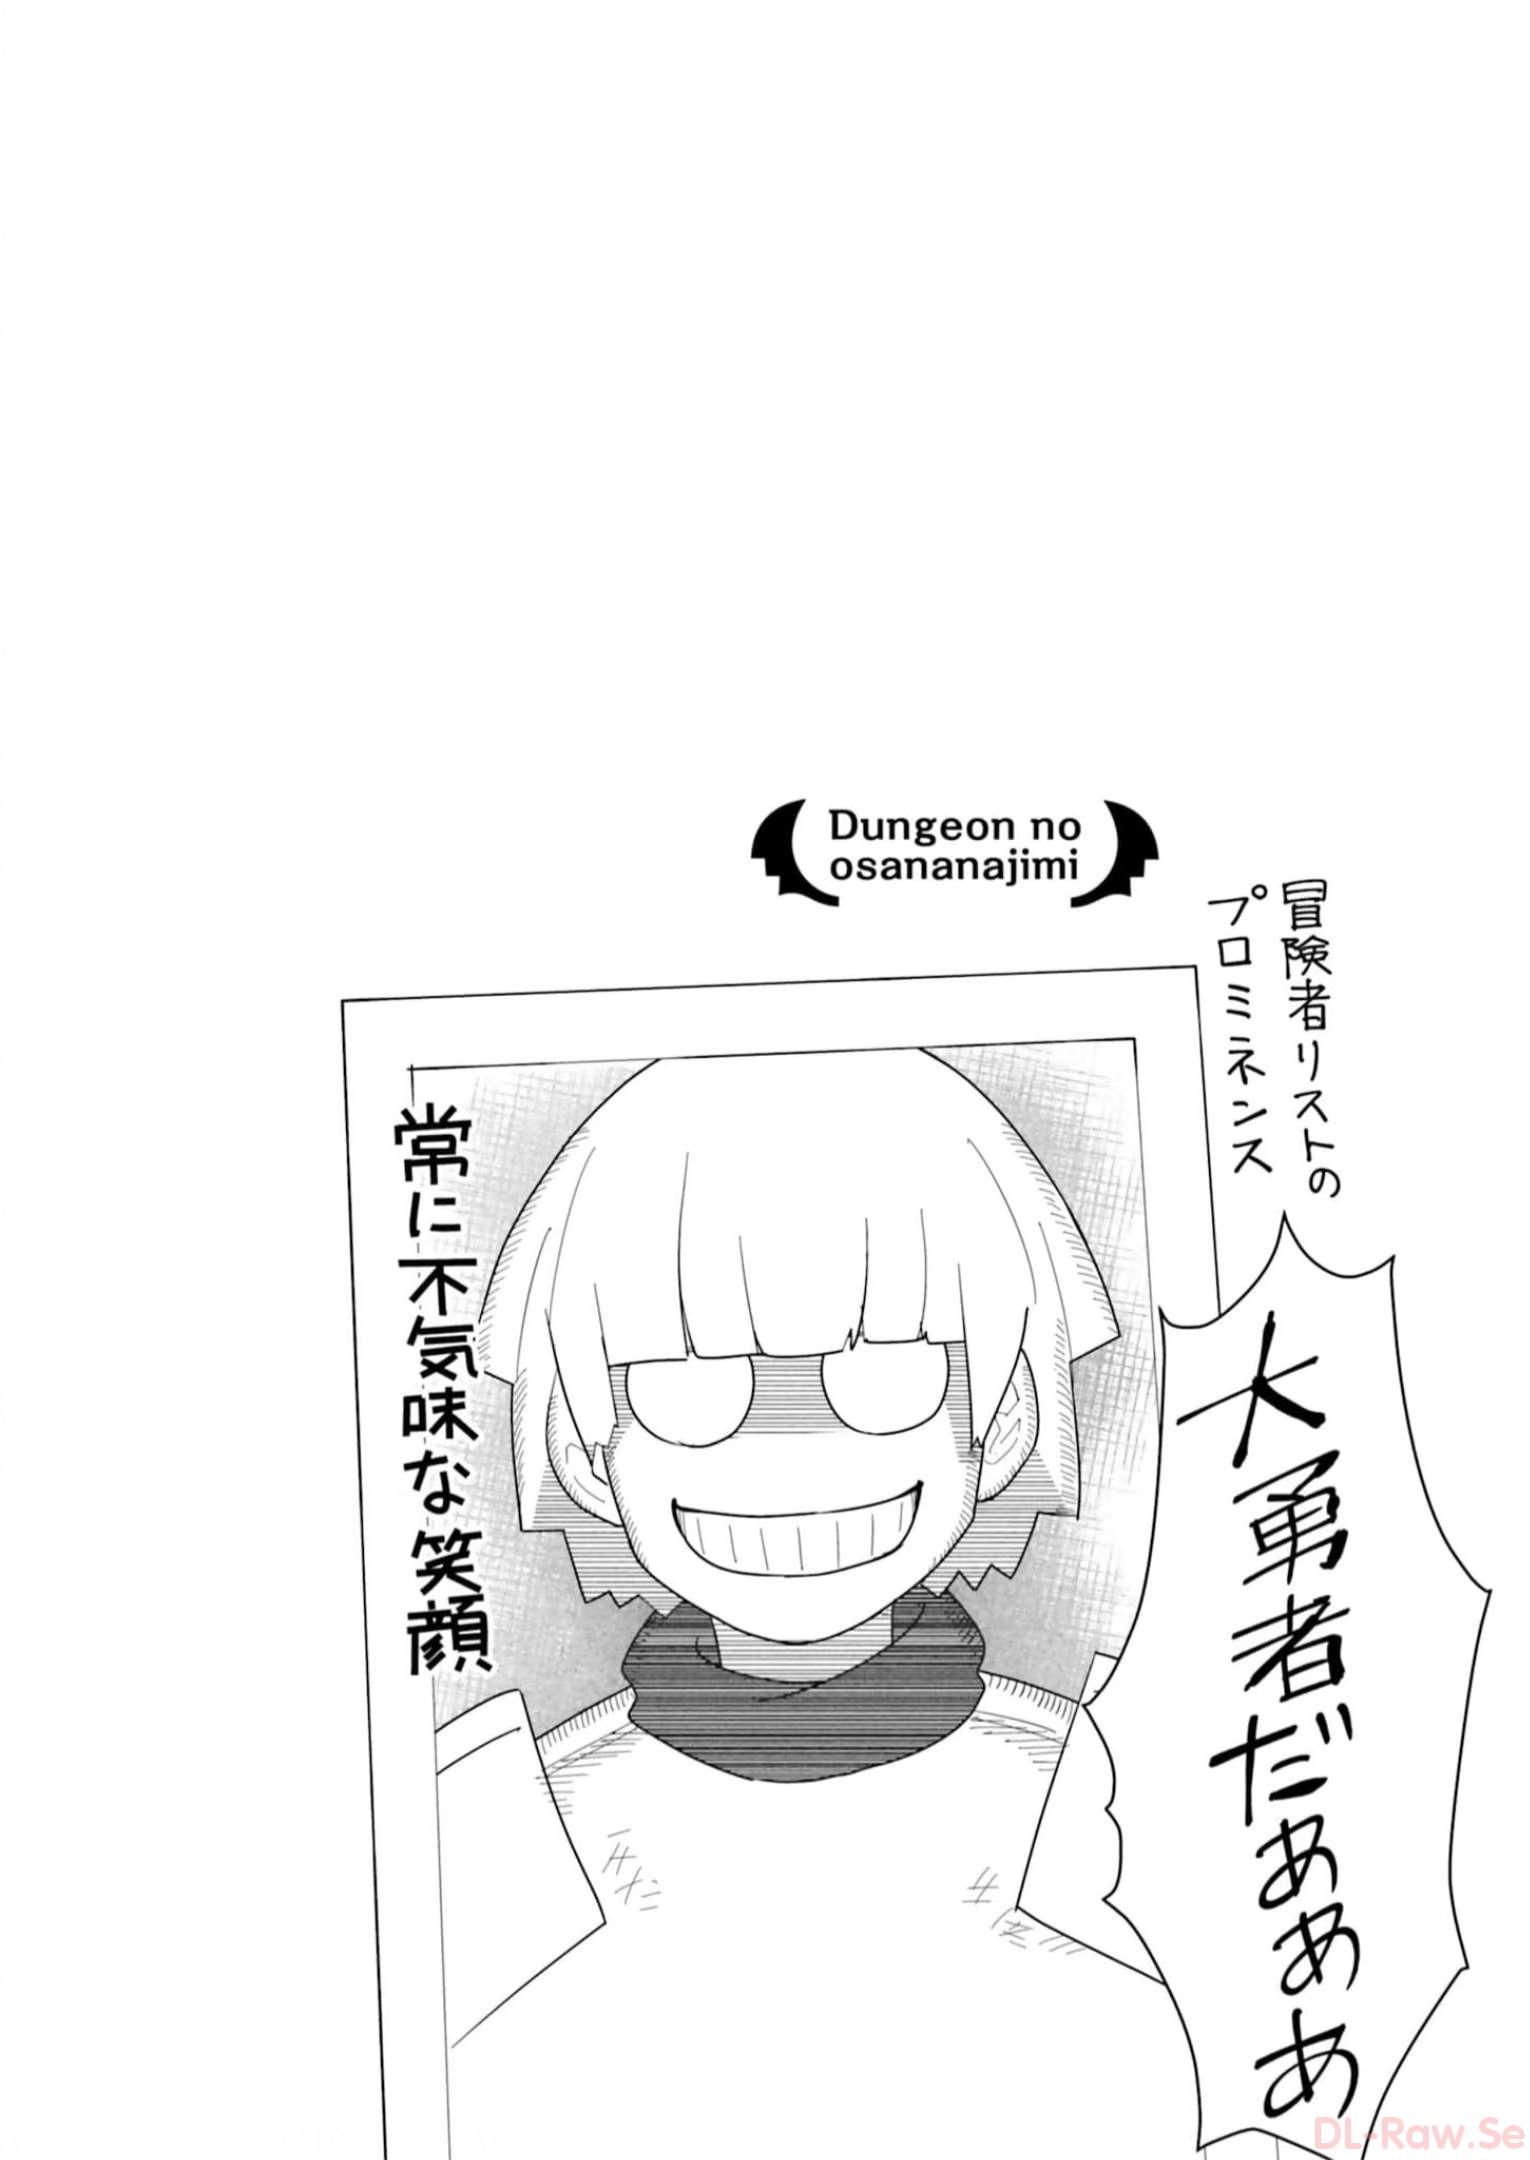 Dungeon Friends Forever Dungeon's Childhood Friend ダンジョンの幼なじみ 第27.5話 - Page 1